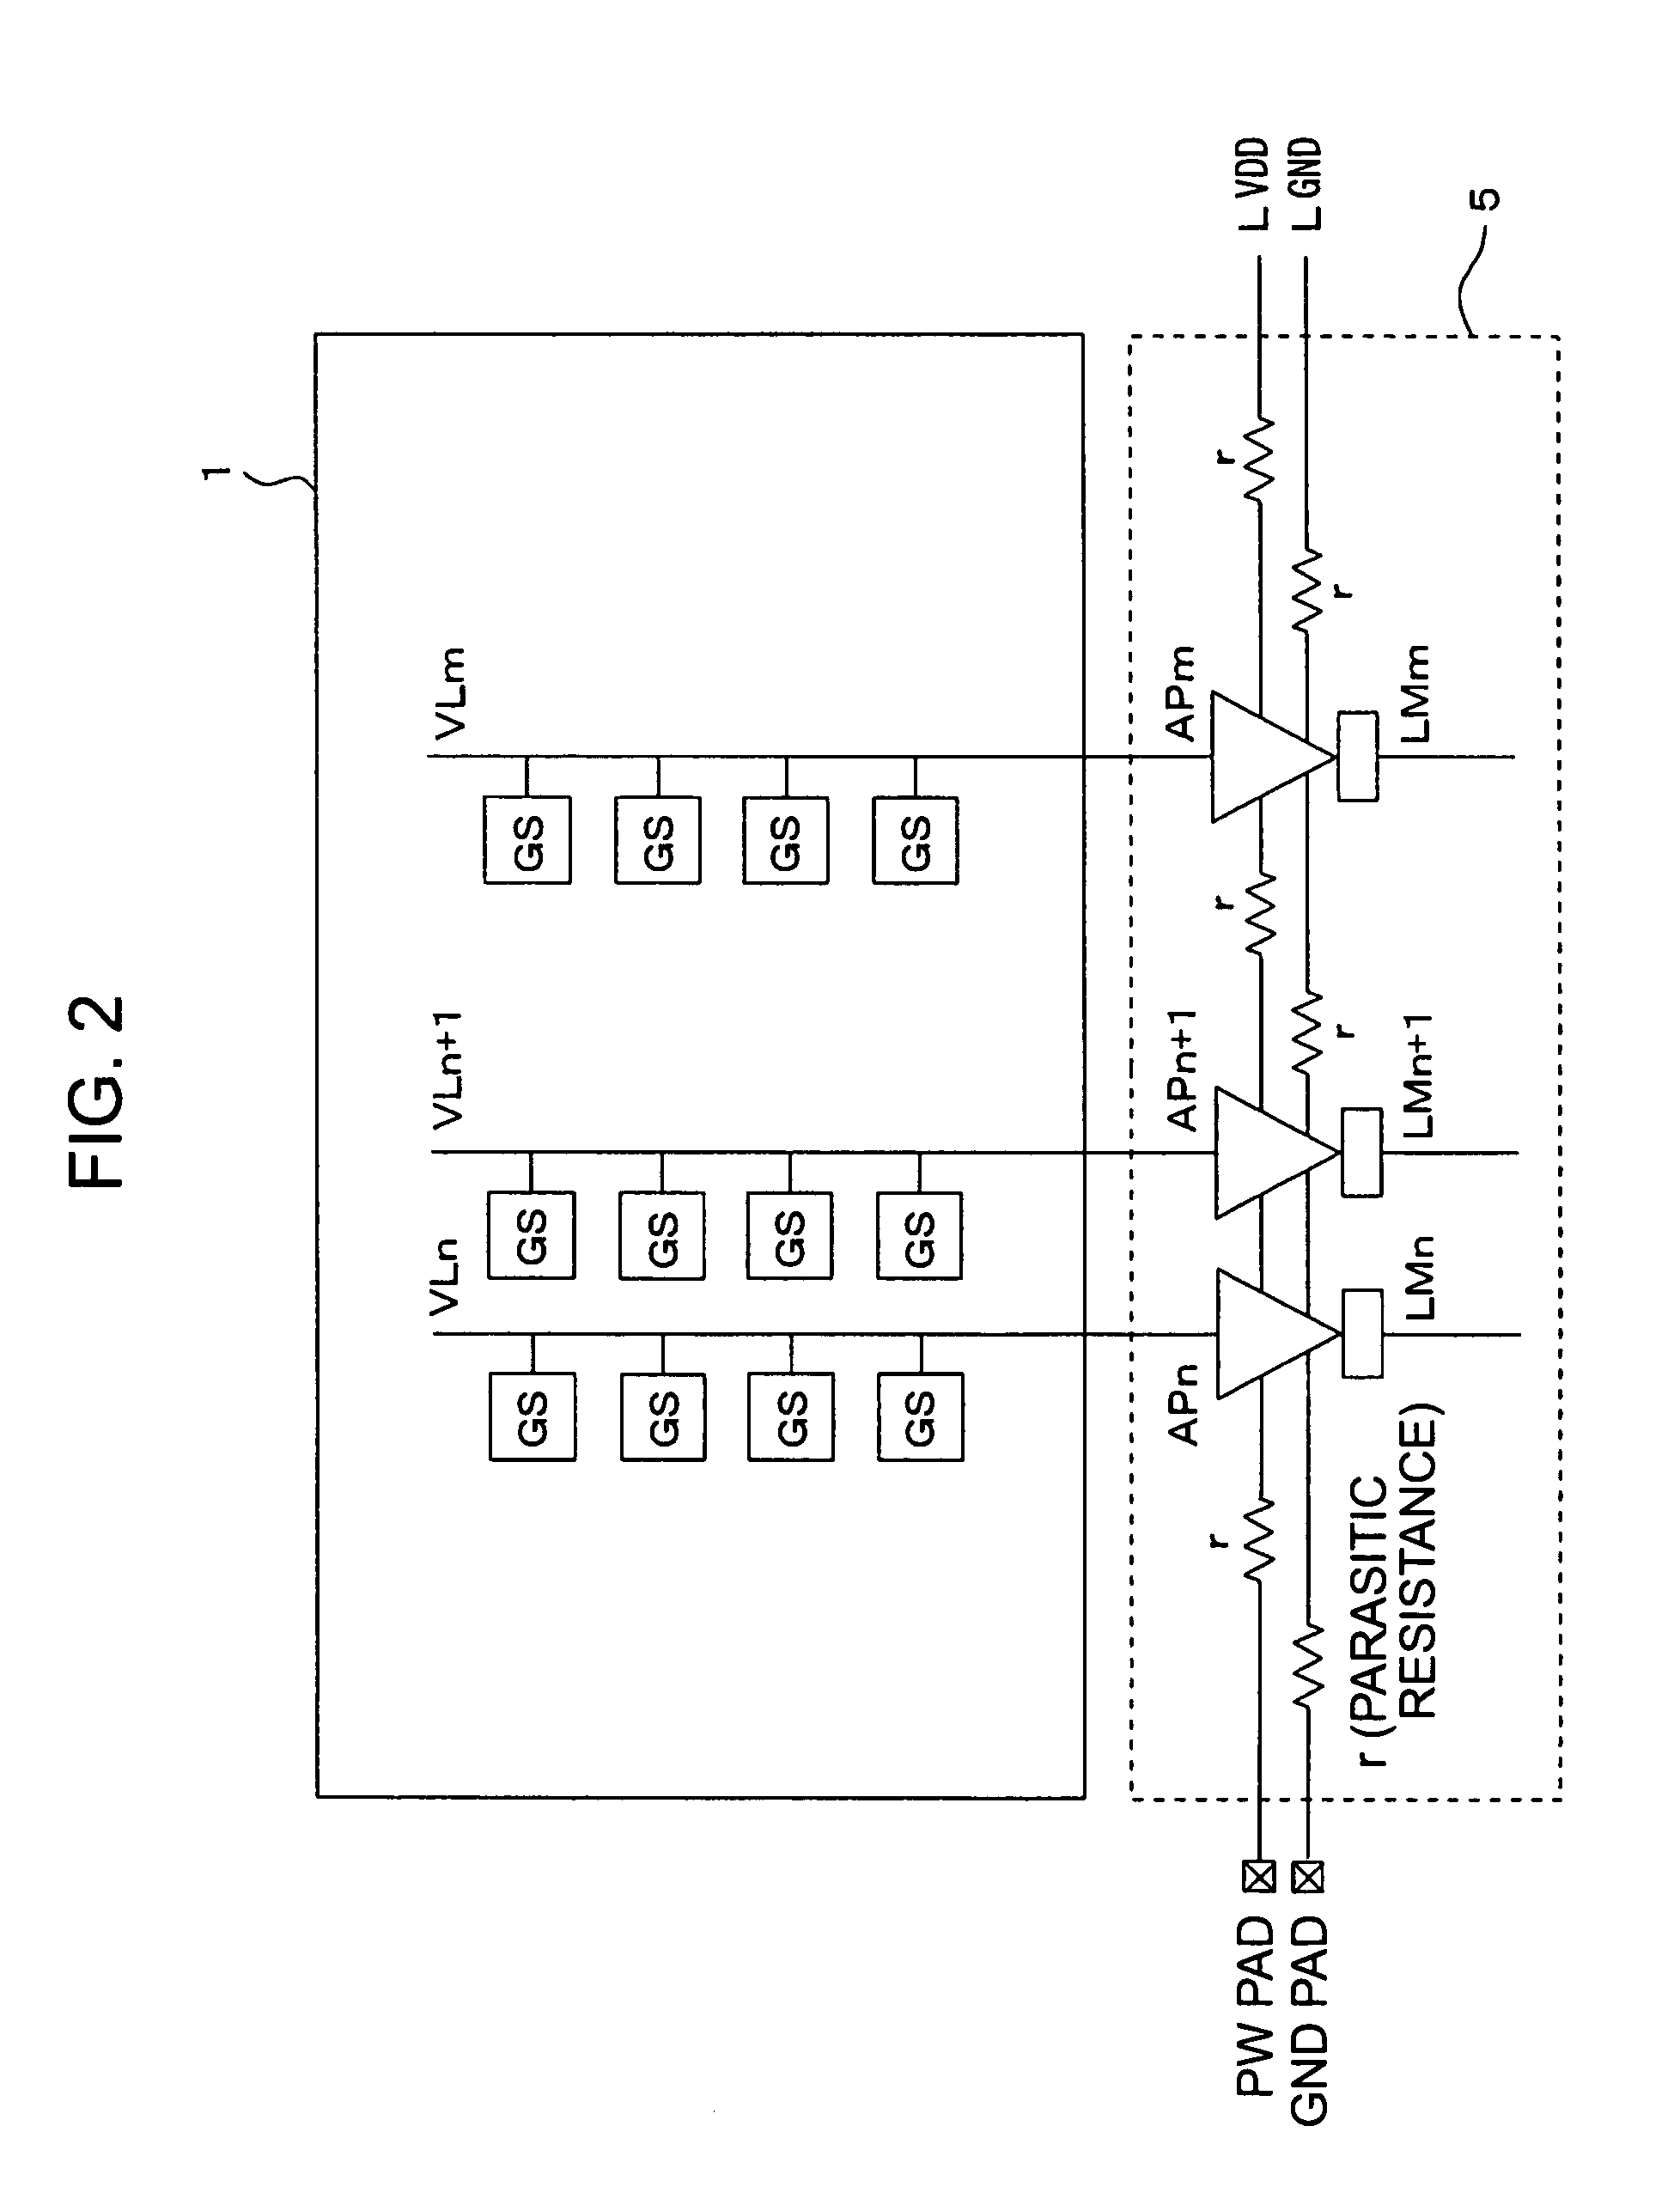 Solid-state image-pickup device with column-line amplifiers and limiters